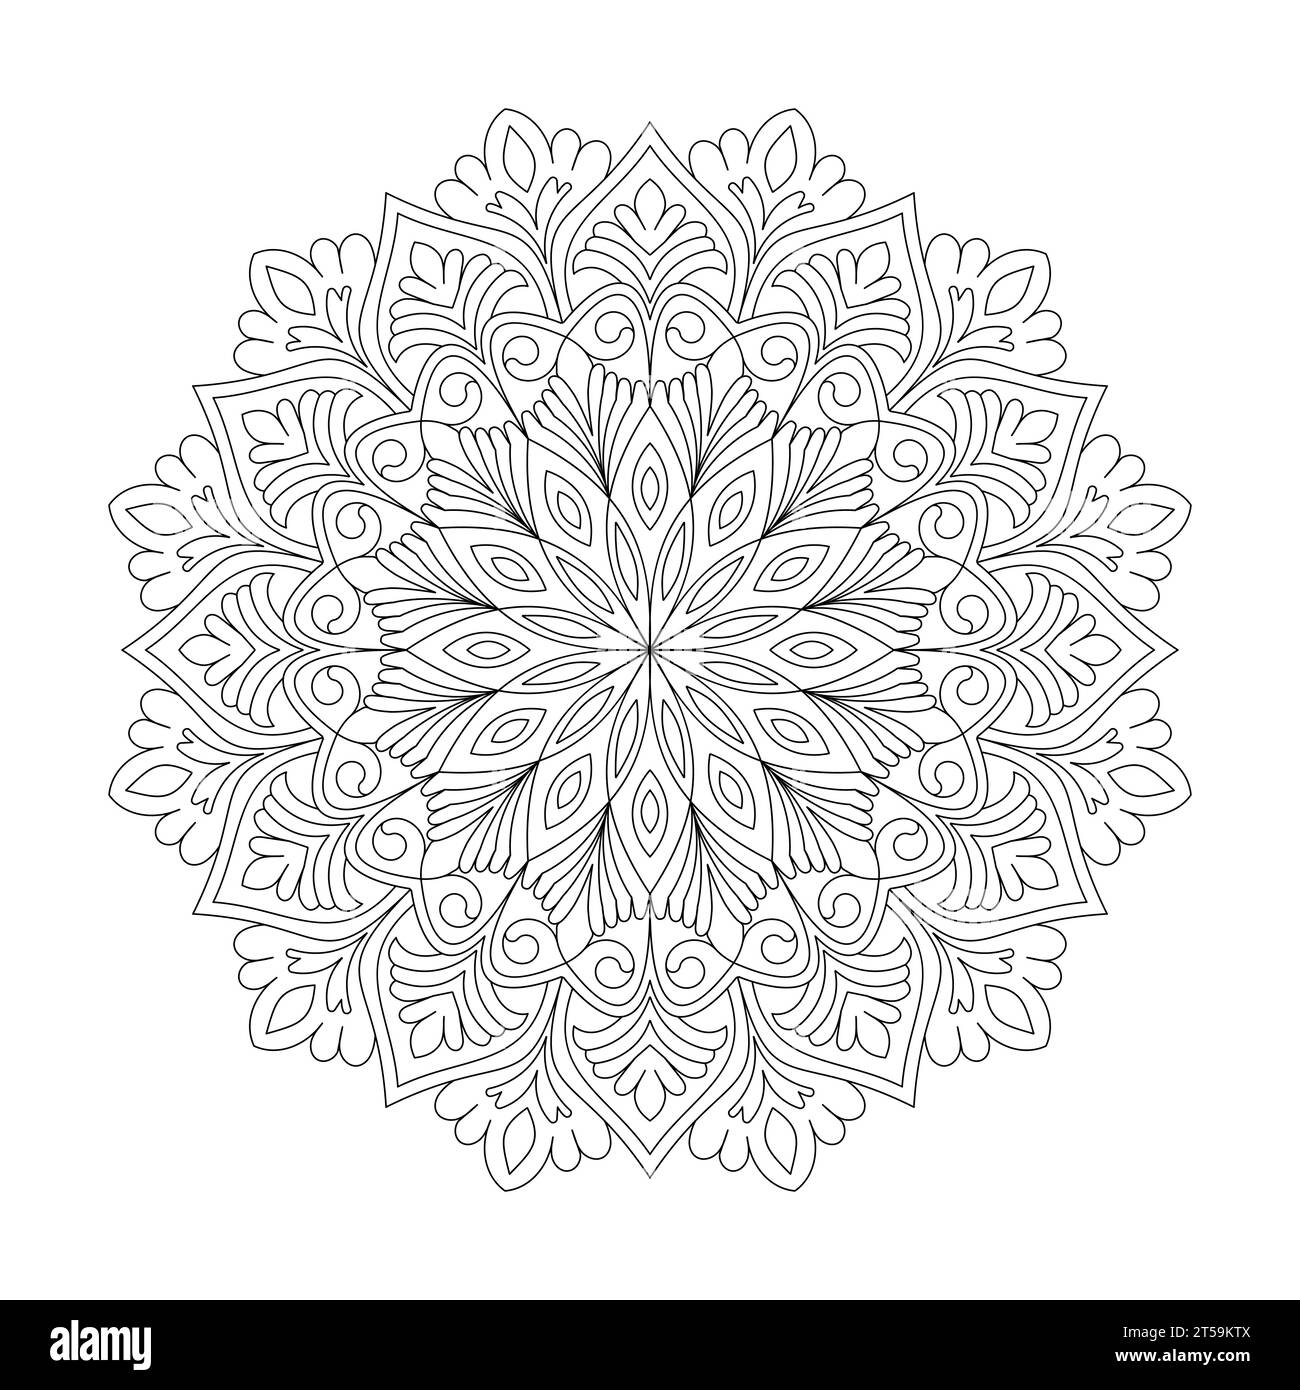 Cosmic Kaleidoscope Adult mandala colouring book page for KDP book interior. Peaceful Petals, Ability to Relax, Brain Experiences, Harmonious Haven, Stock Vector